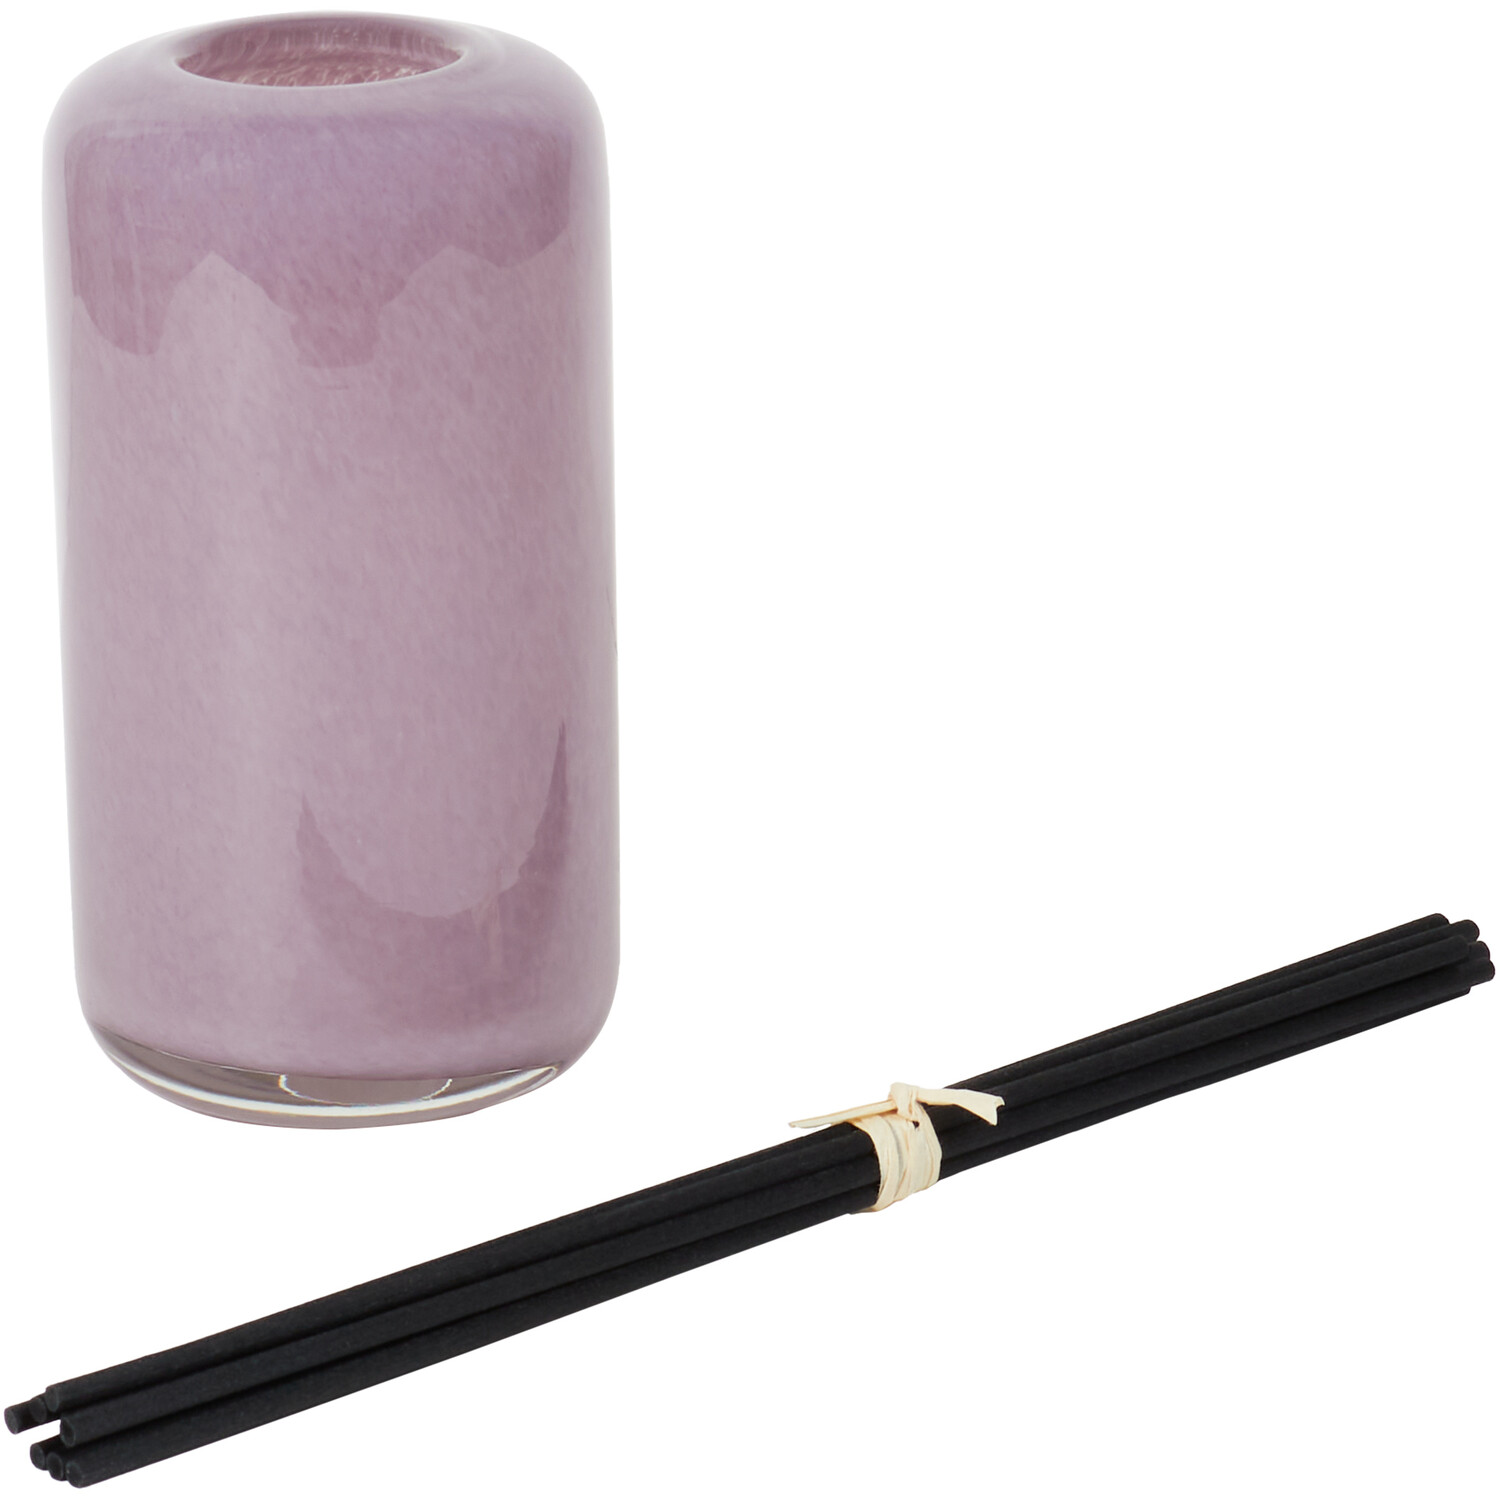 Early Morning Garden Diffuser 200ml - Purple Image 2